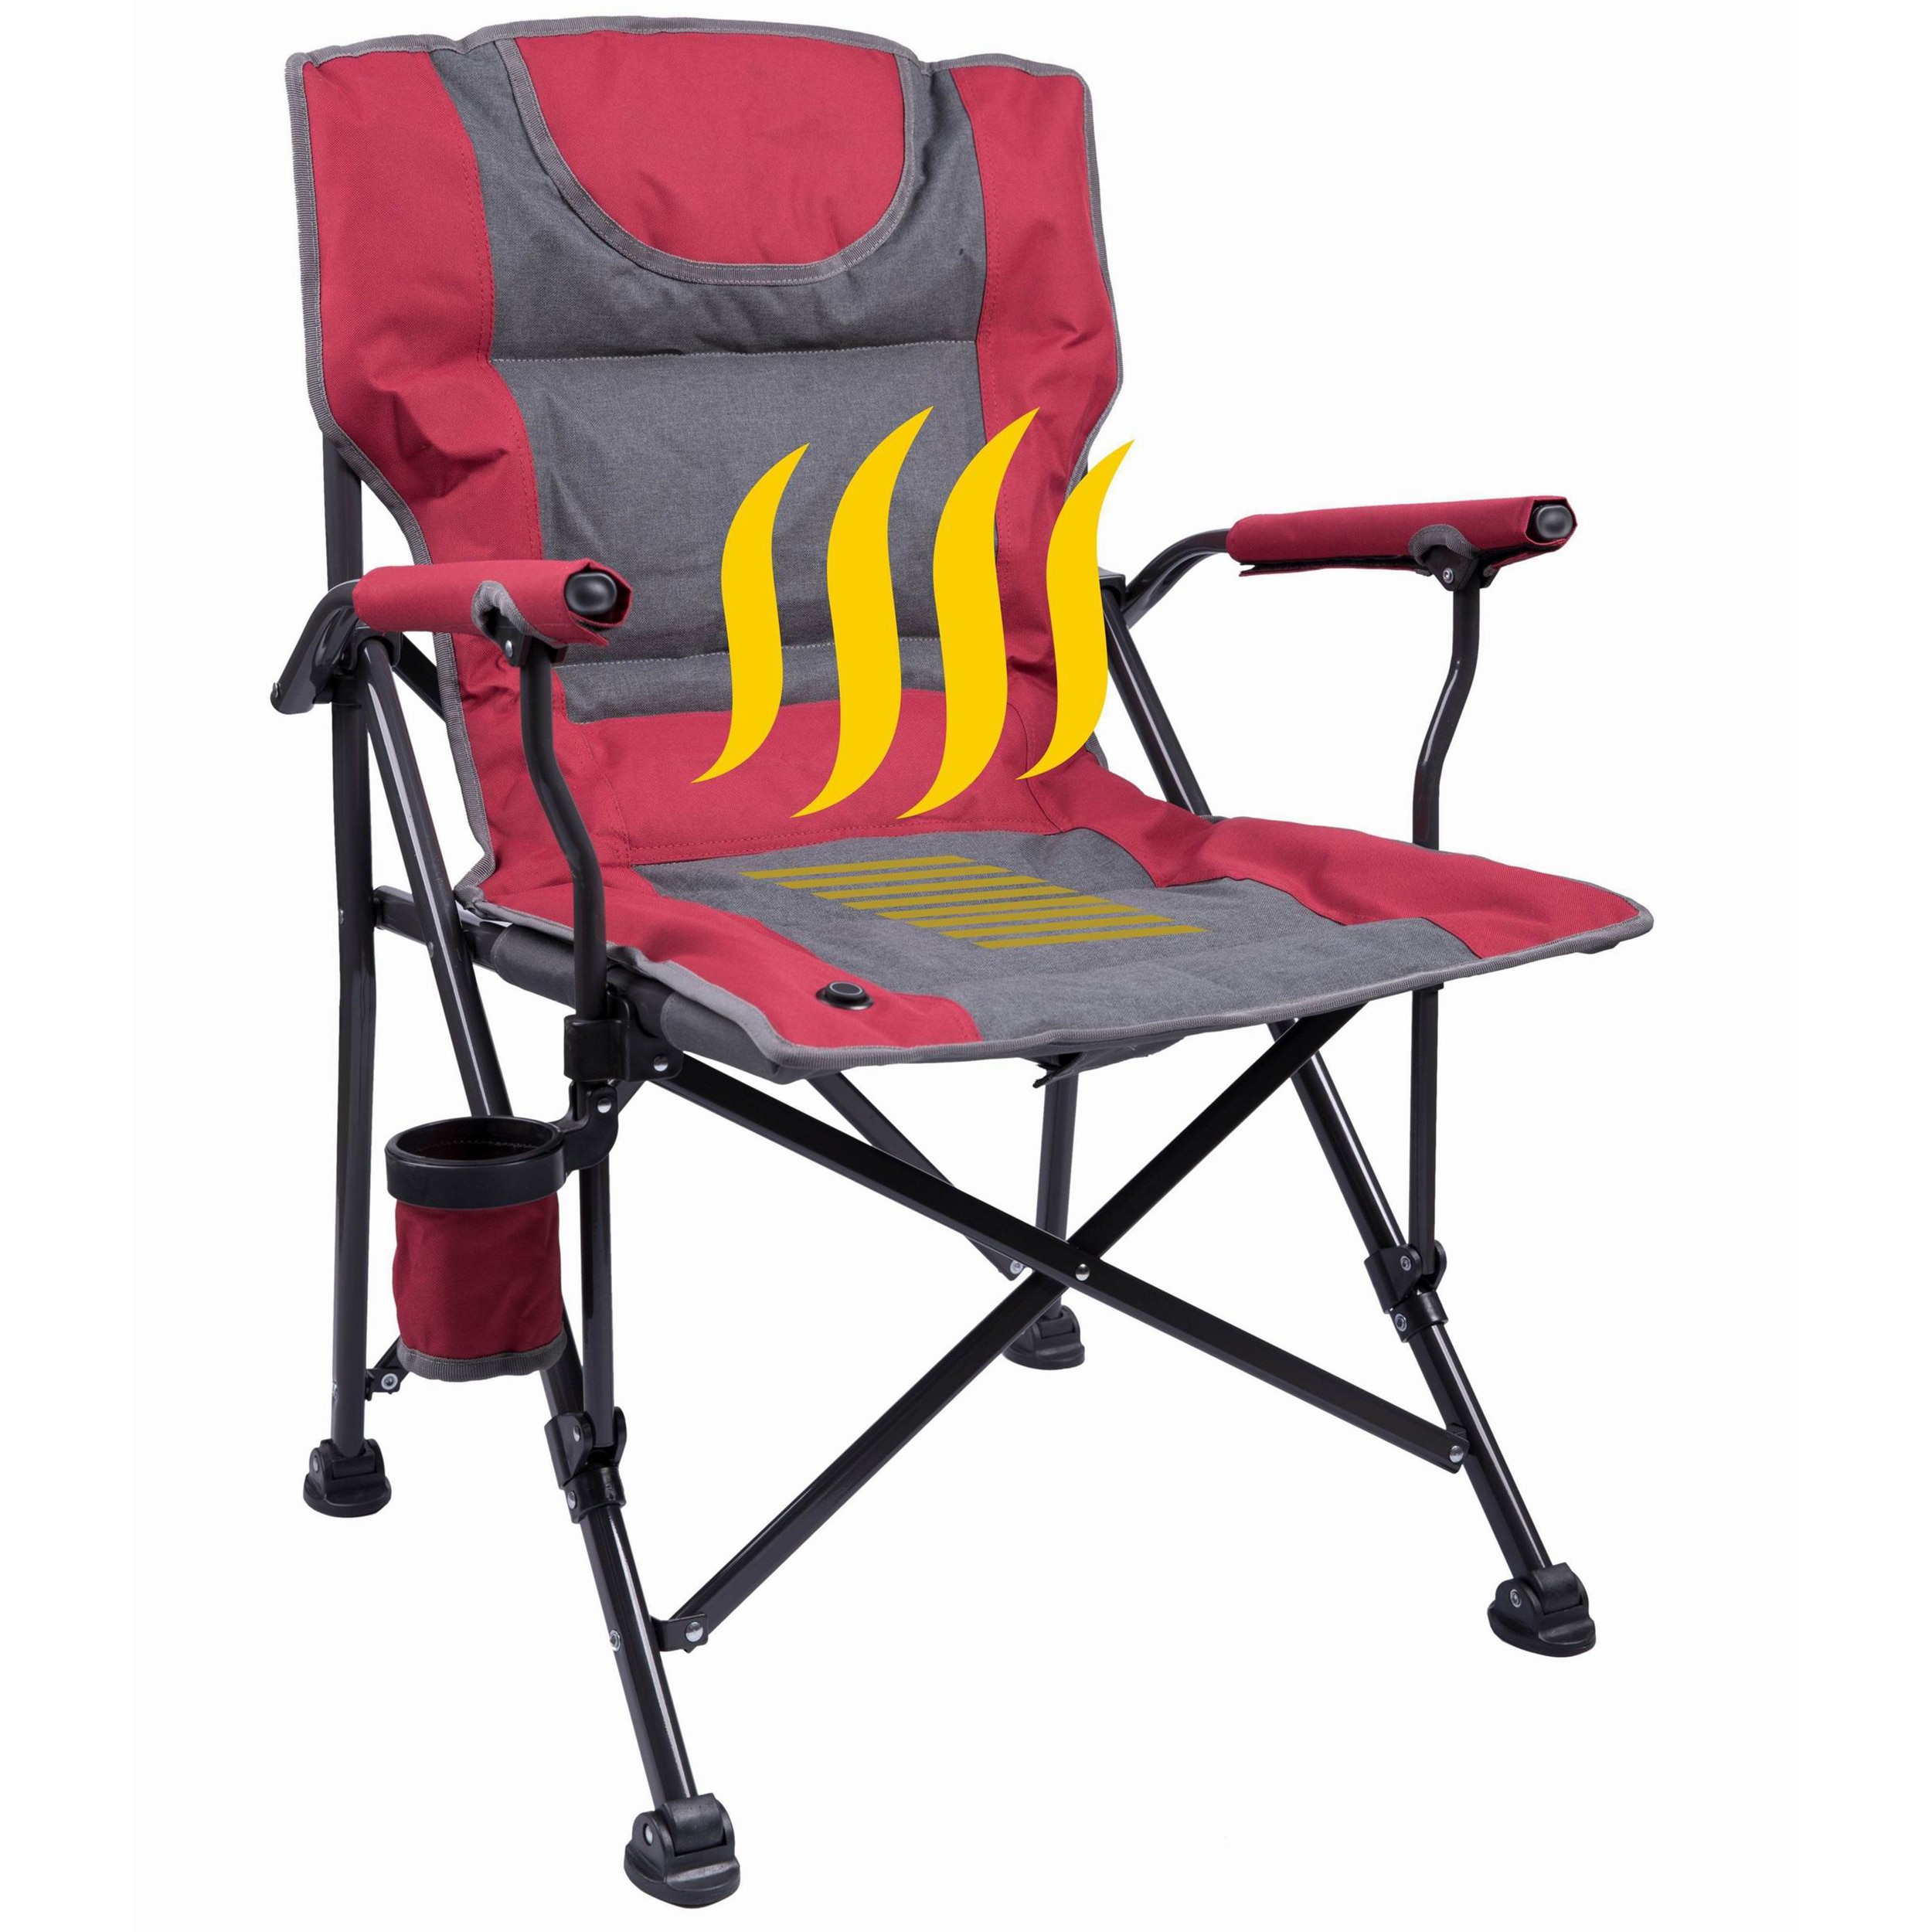 Backyard Expressions Luxury Heated Portable Camp Chair Red/Grey Great for Camping, Sports and The Beach